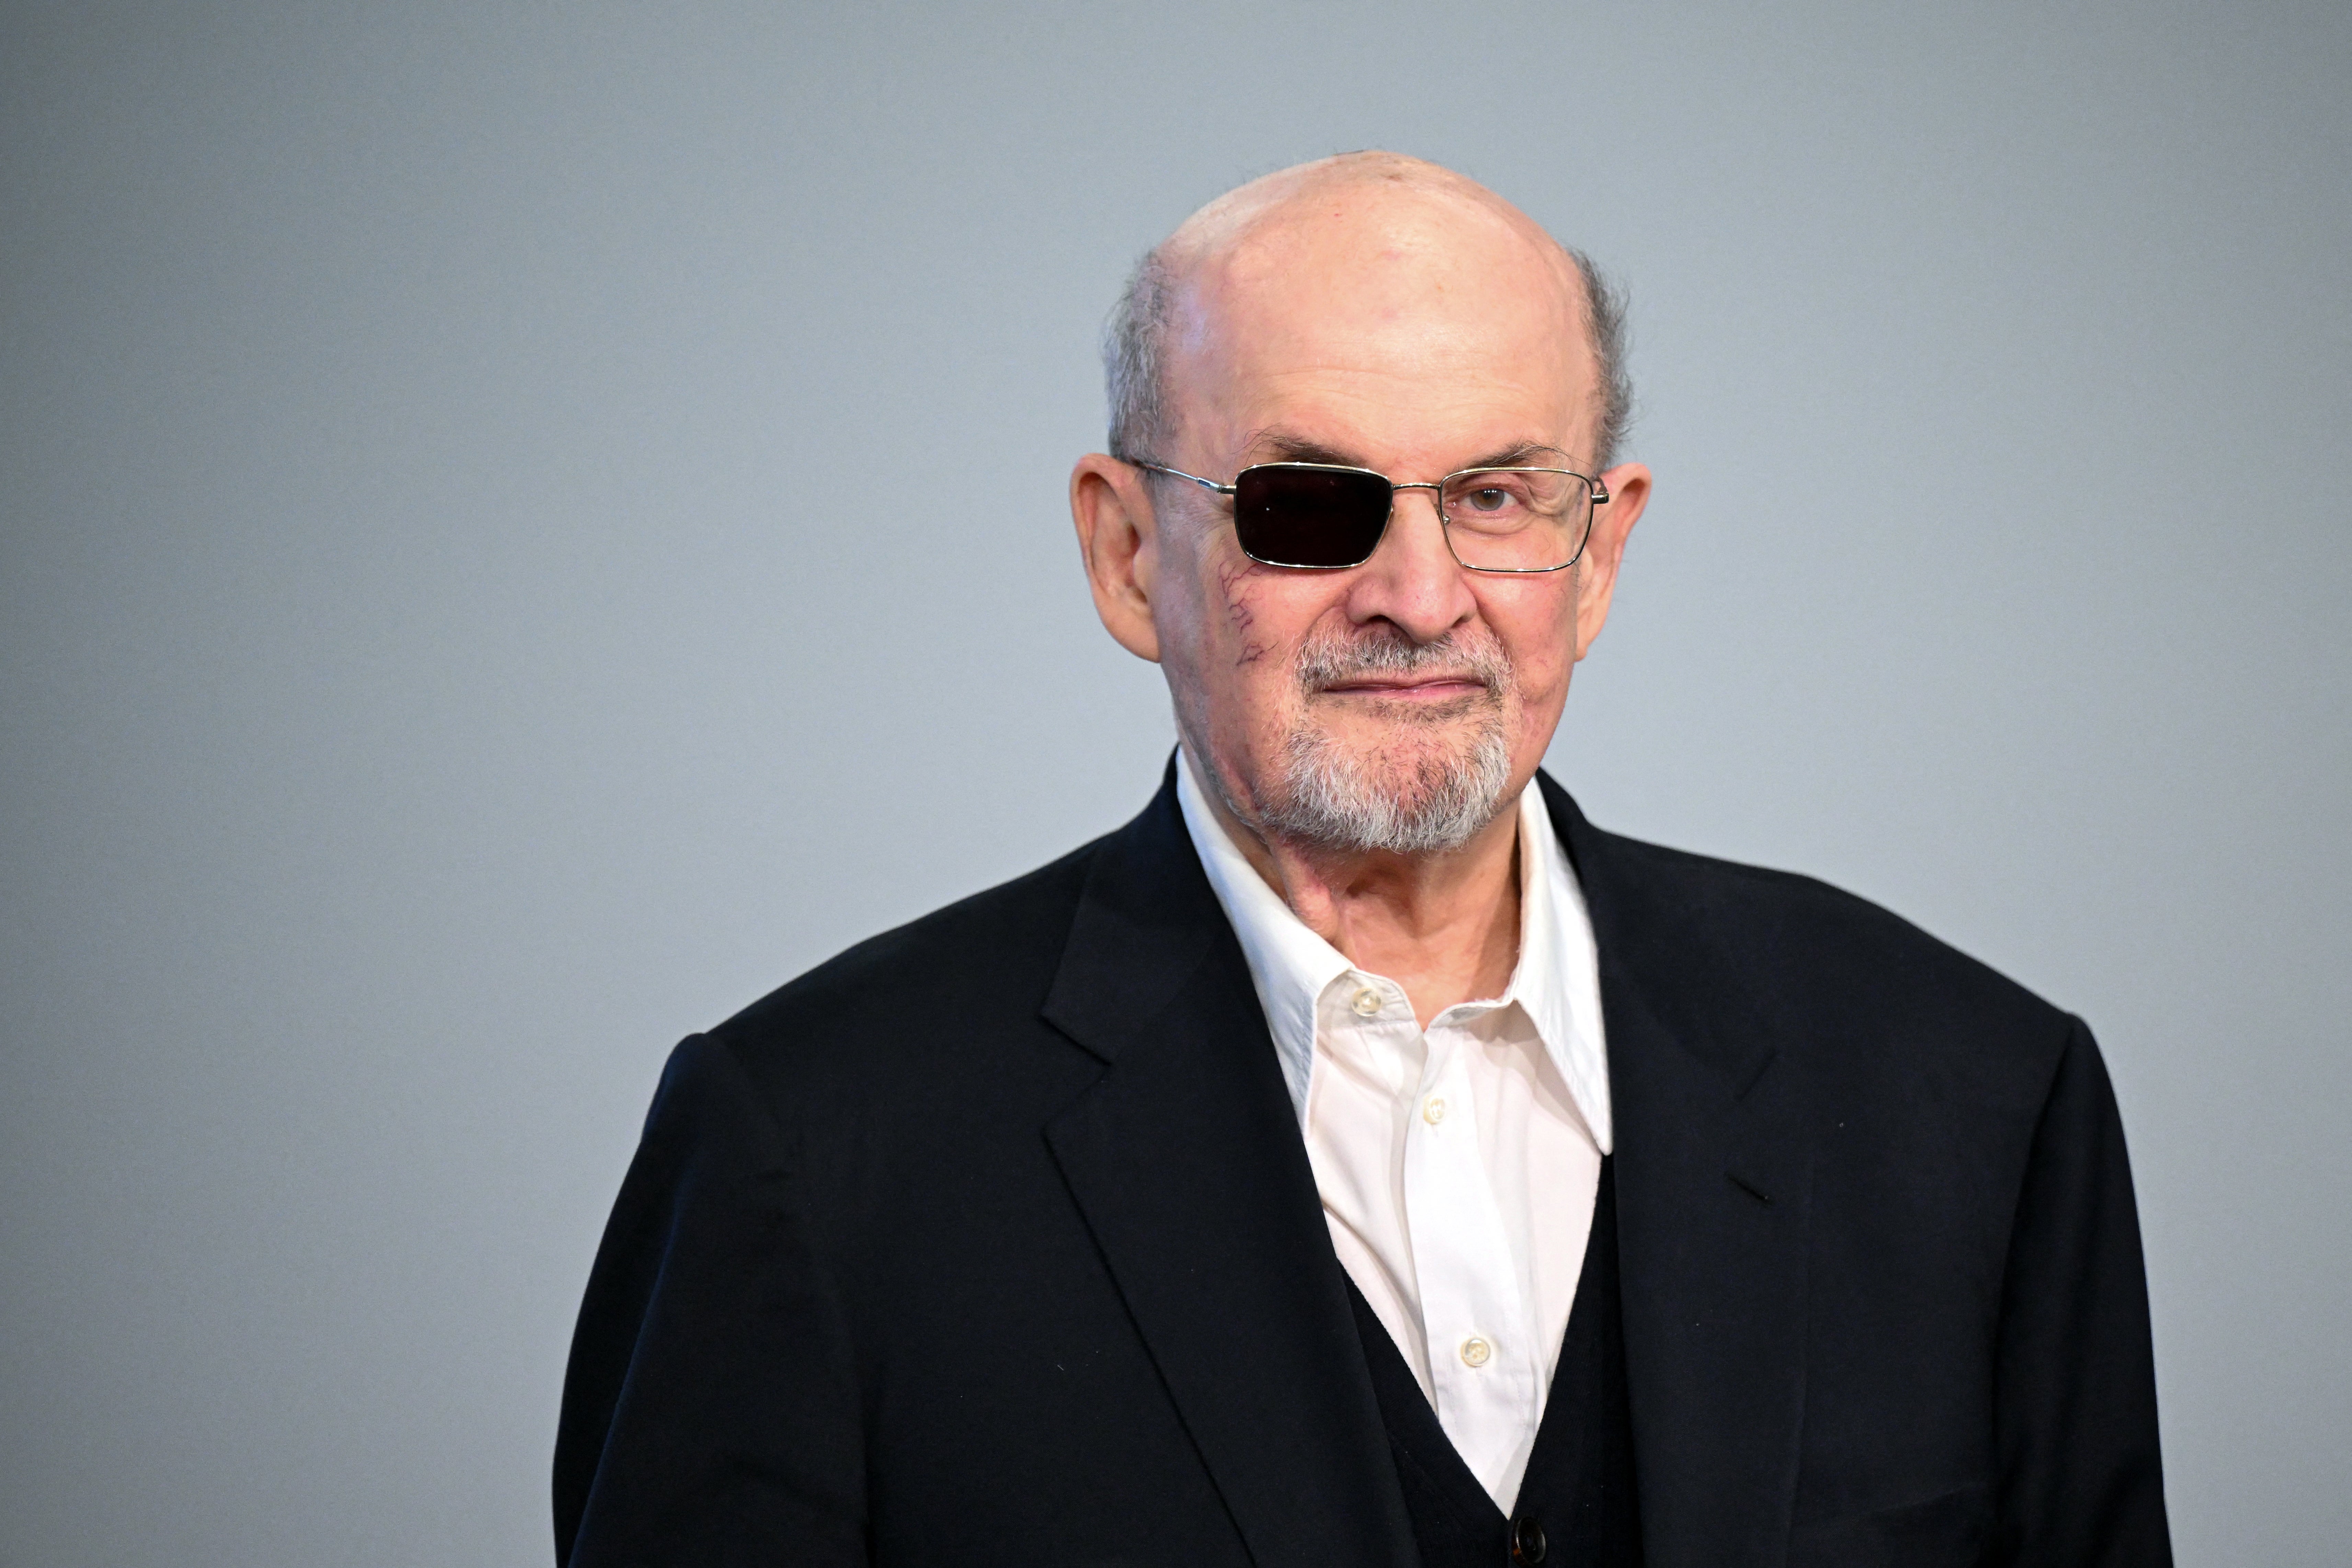 Salman Rushdie, pictured in October 2023, gave his first televised interview since he was attacked and nearly killed in 2022 over his 1988 novel